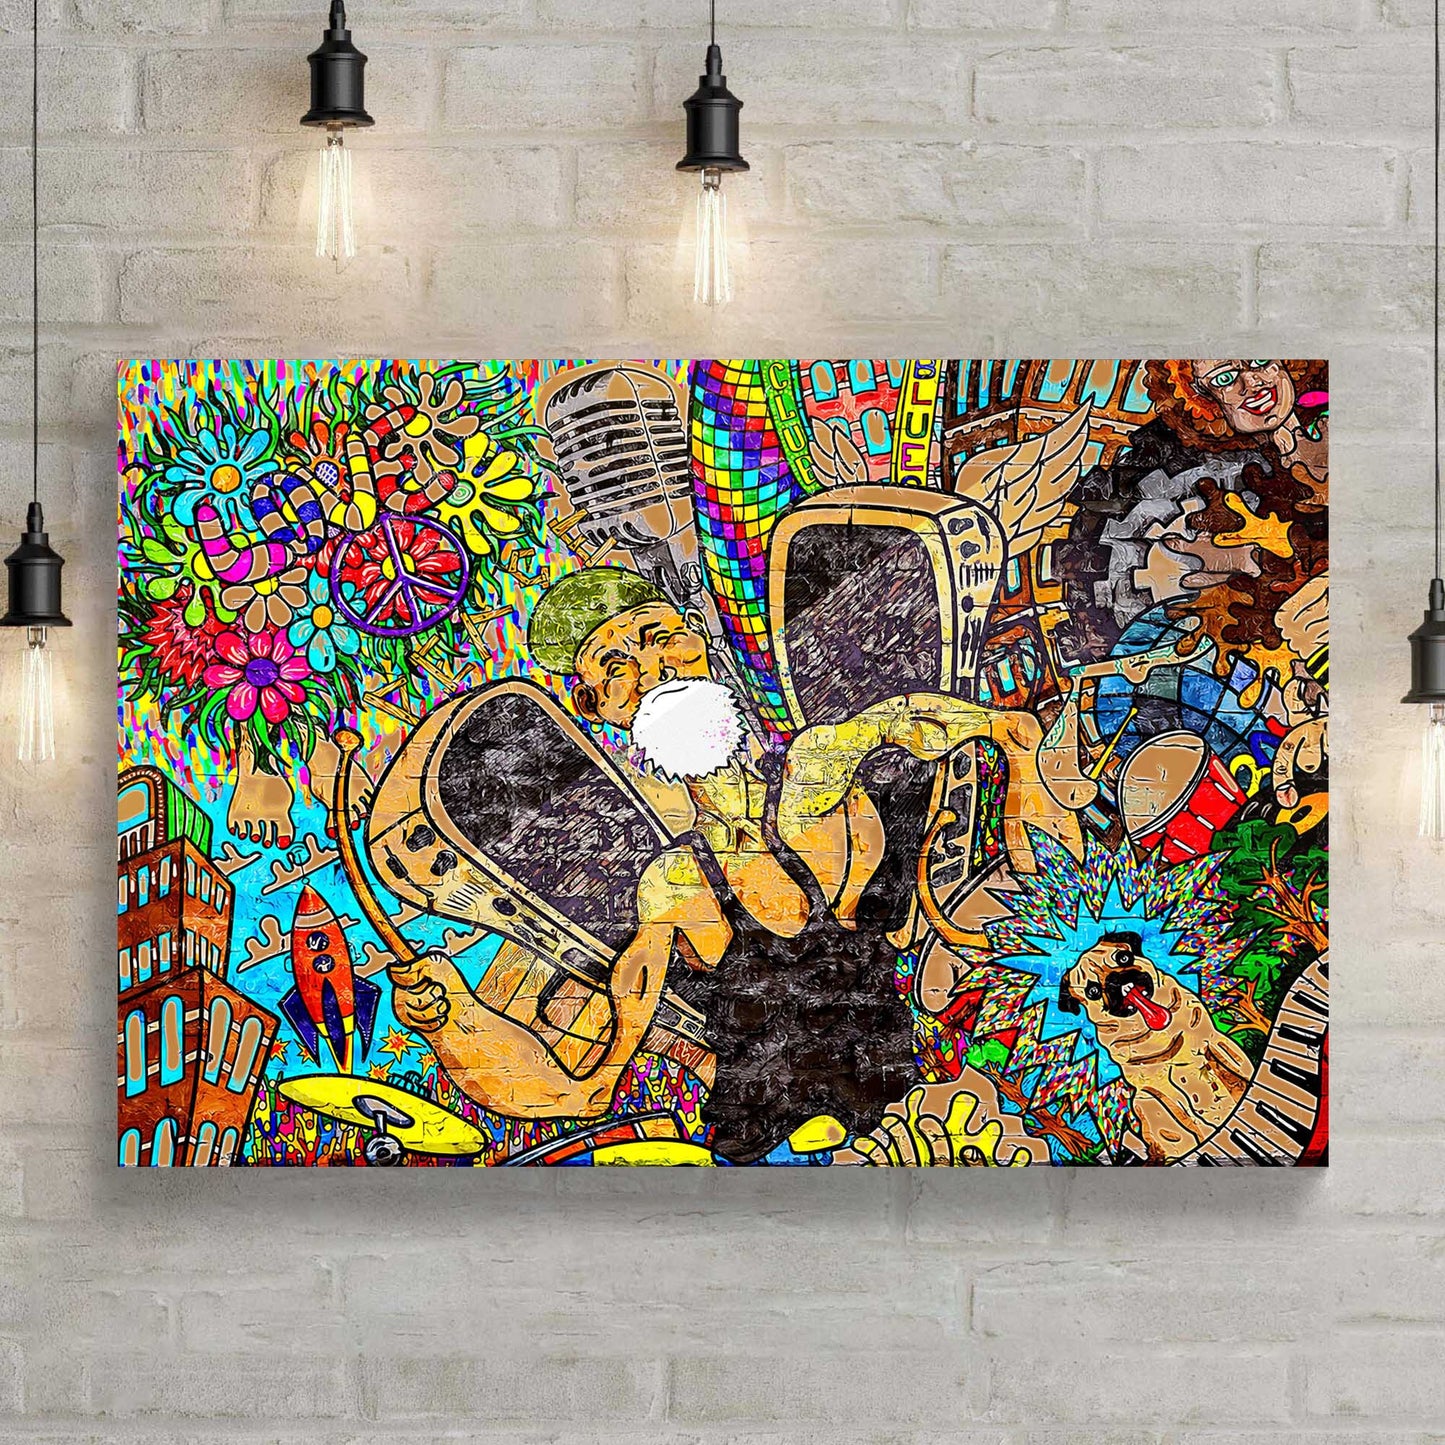 Vibrant Graffiti Canvas Wall Art  - Image by Tailored Canvases